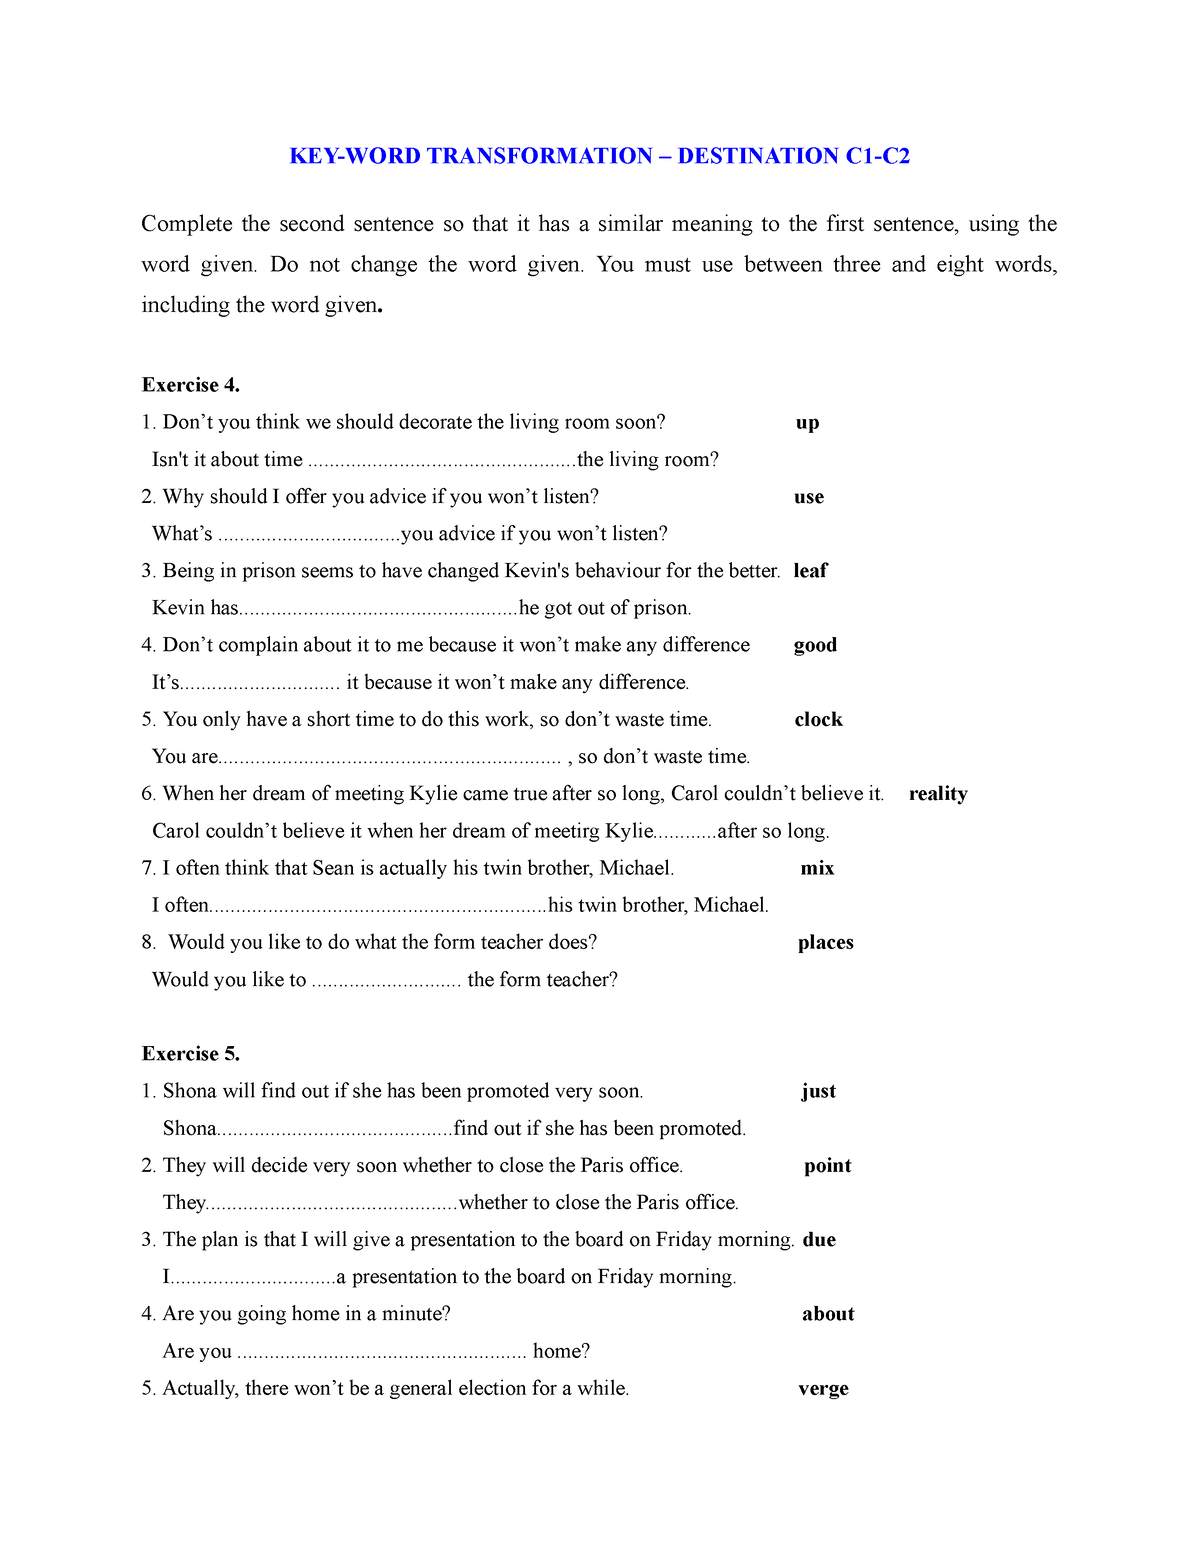 Attachment student 2 - nothing - KEY-WORD TRANSFORMATION ...